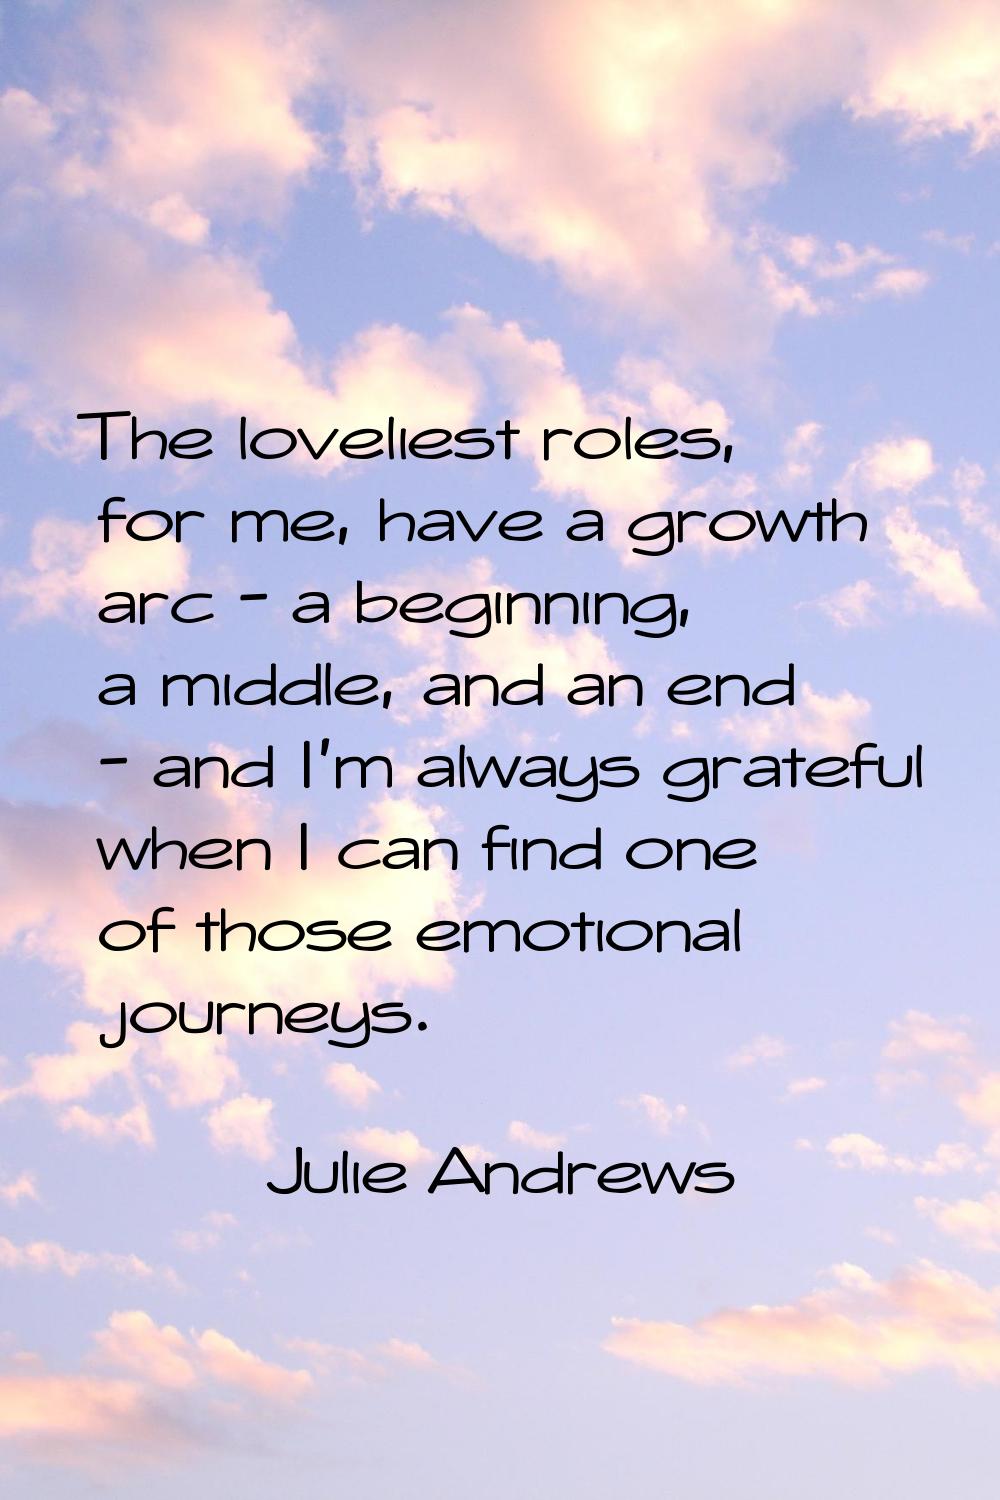 The loveliest roles, for me, have a growth arc - a beginning, a middle, and an end - and I'm always